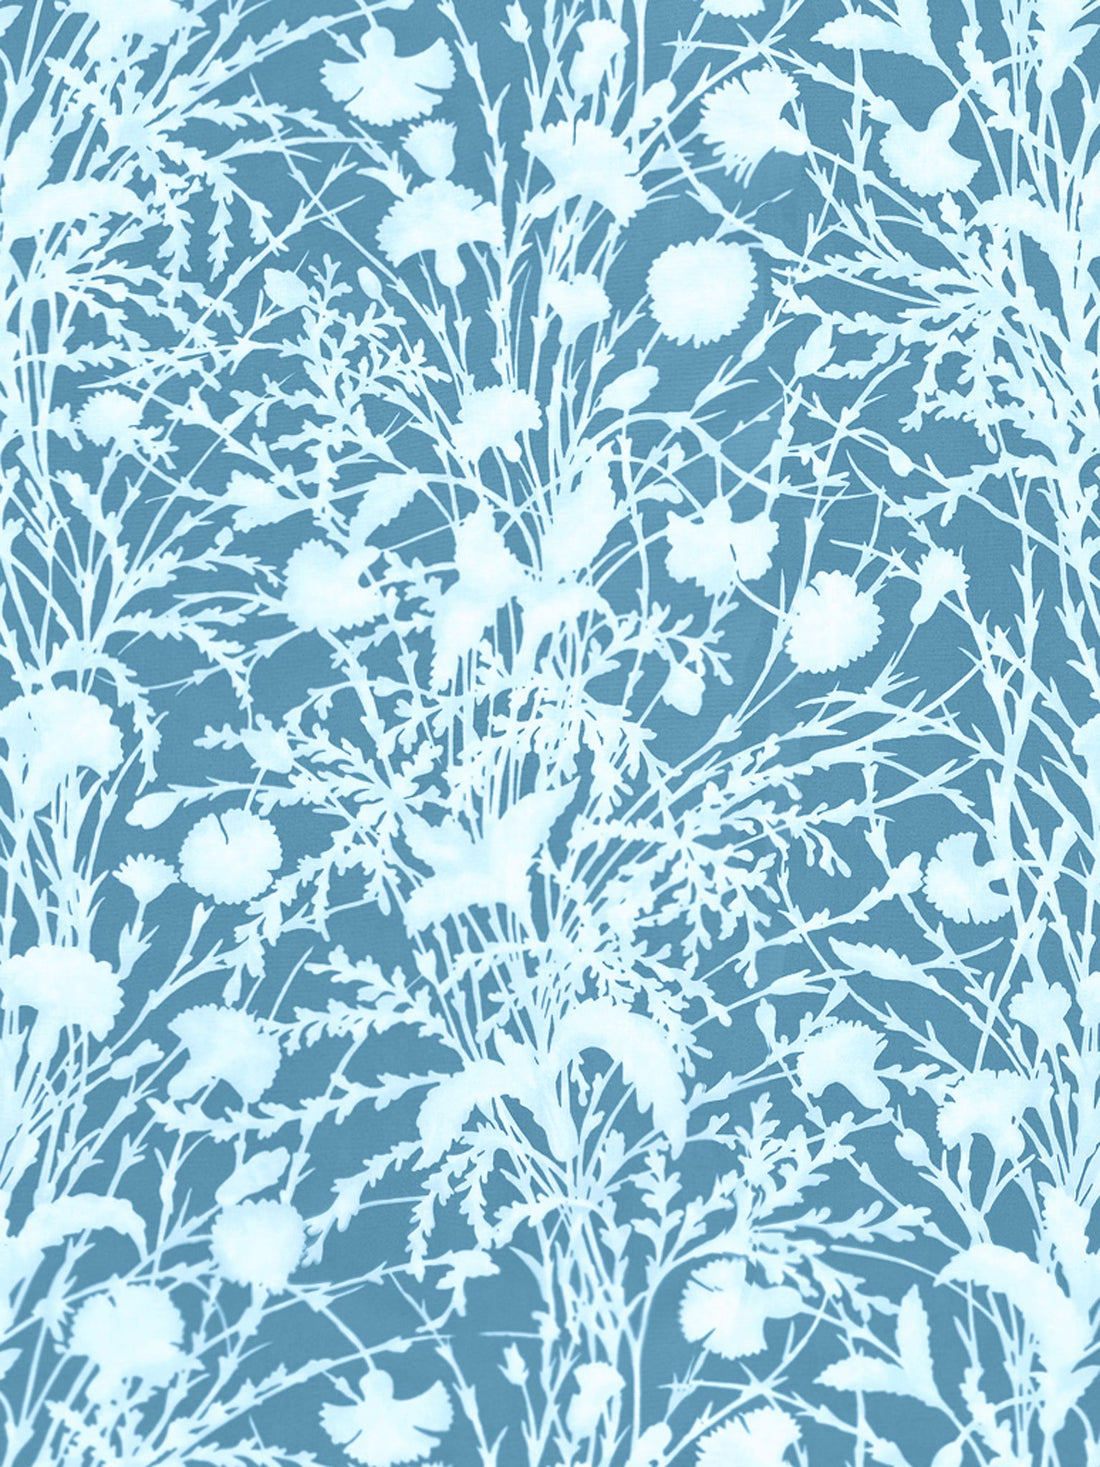 Wildflower fabric in blueprint color - pattern number GW 000516623 - by Scalamandre in the Grey Watkins collection